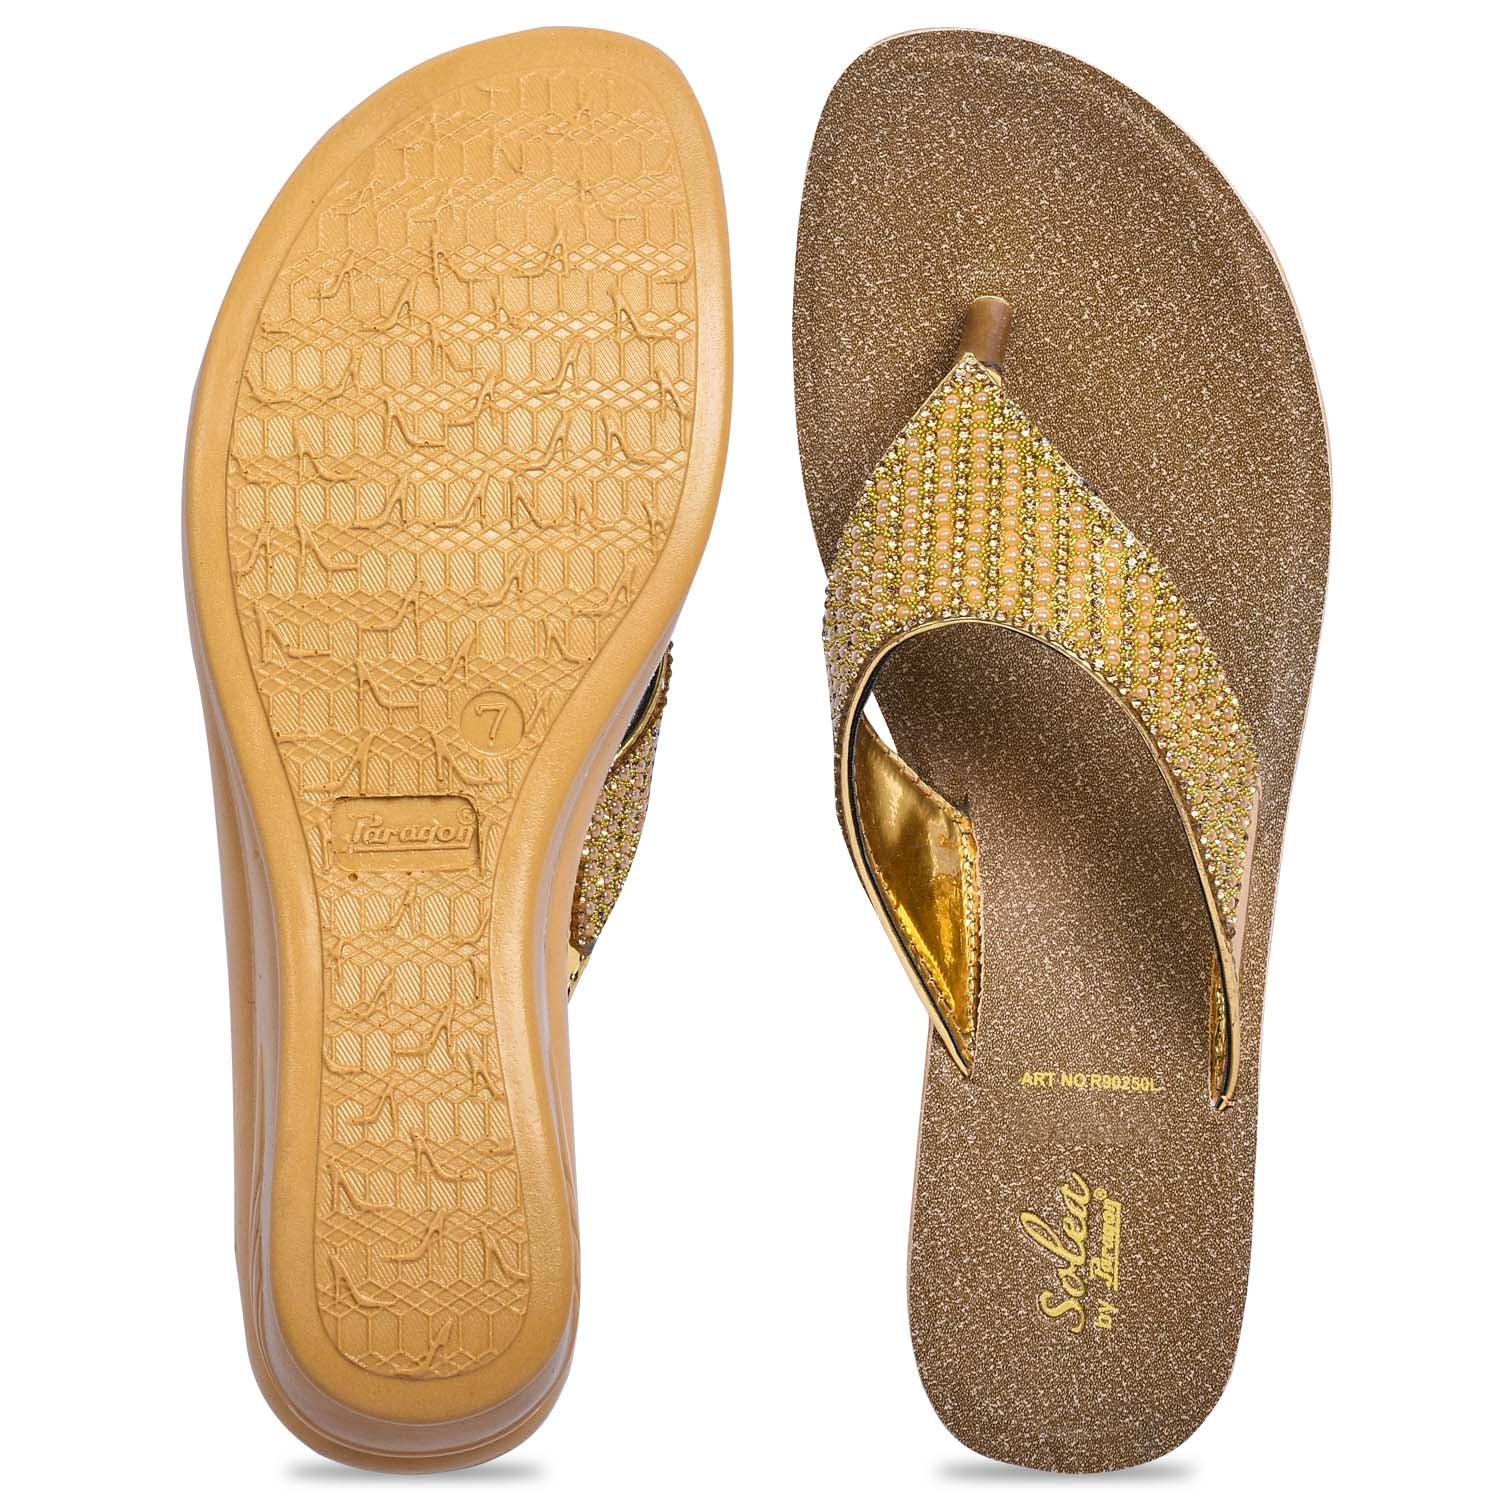 Paragon R90250L Women Sandals | Casual &amp; Formal Sandals | Stylish, Comfortable &amp; Durable | For Daily &amp; Occasion Wear